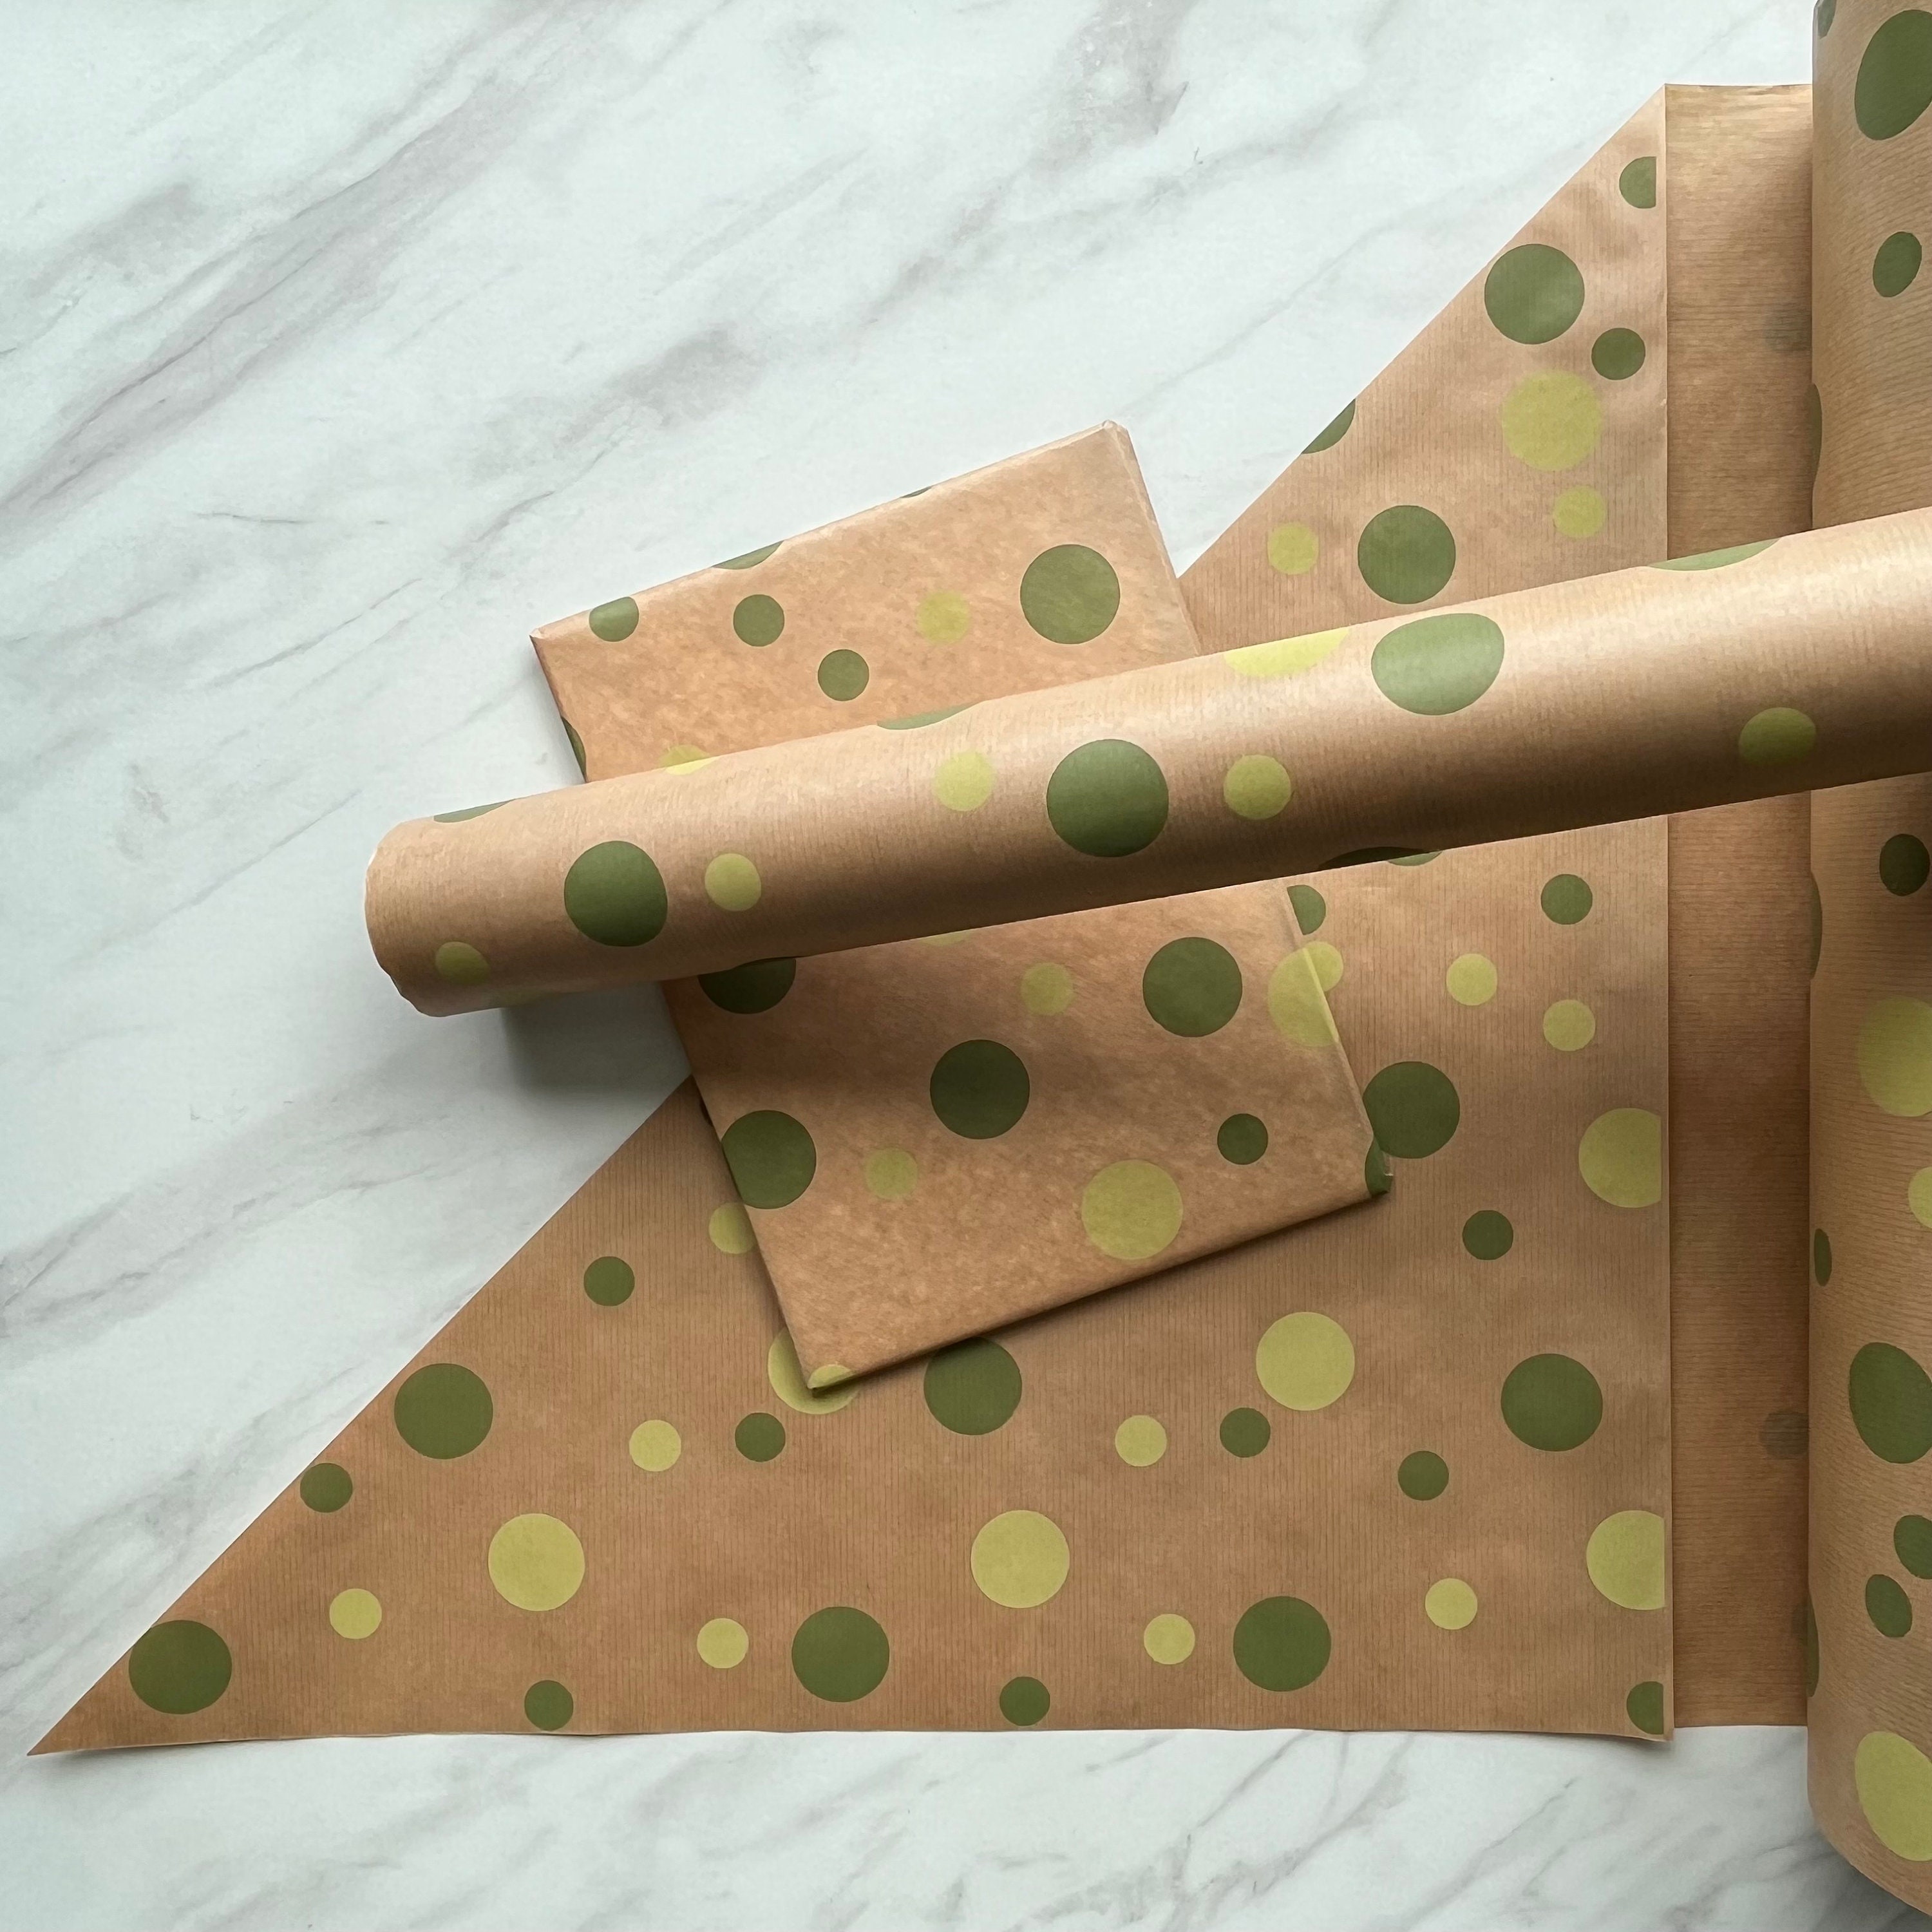 Dark Green Velvet Texture Like Wrapping Paper Birthday Gift Wrap Solid  Color Wrapping Sheets Holiday Gift Wrap 